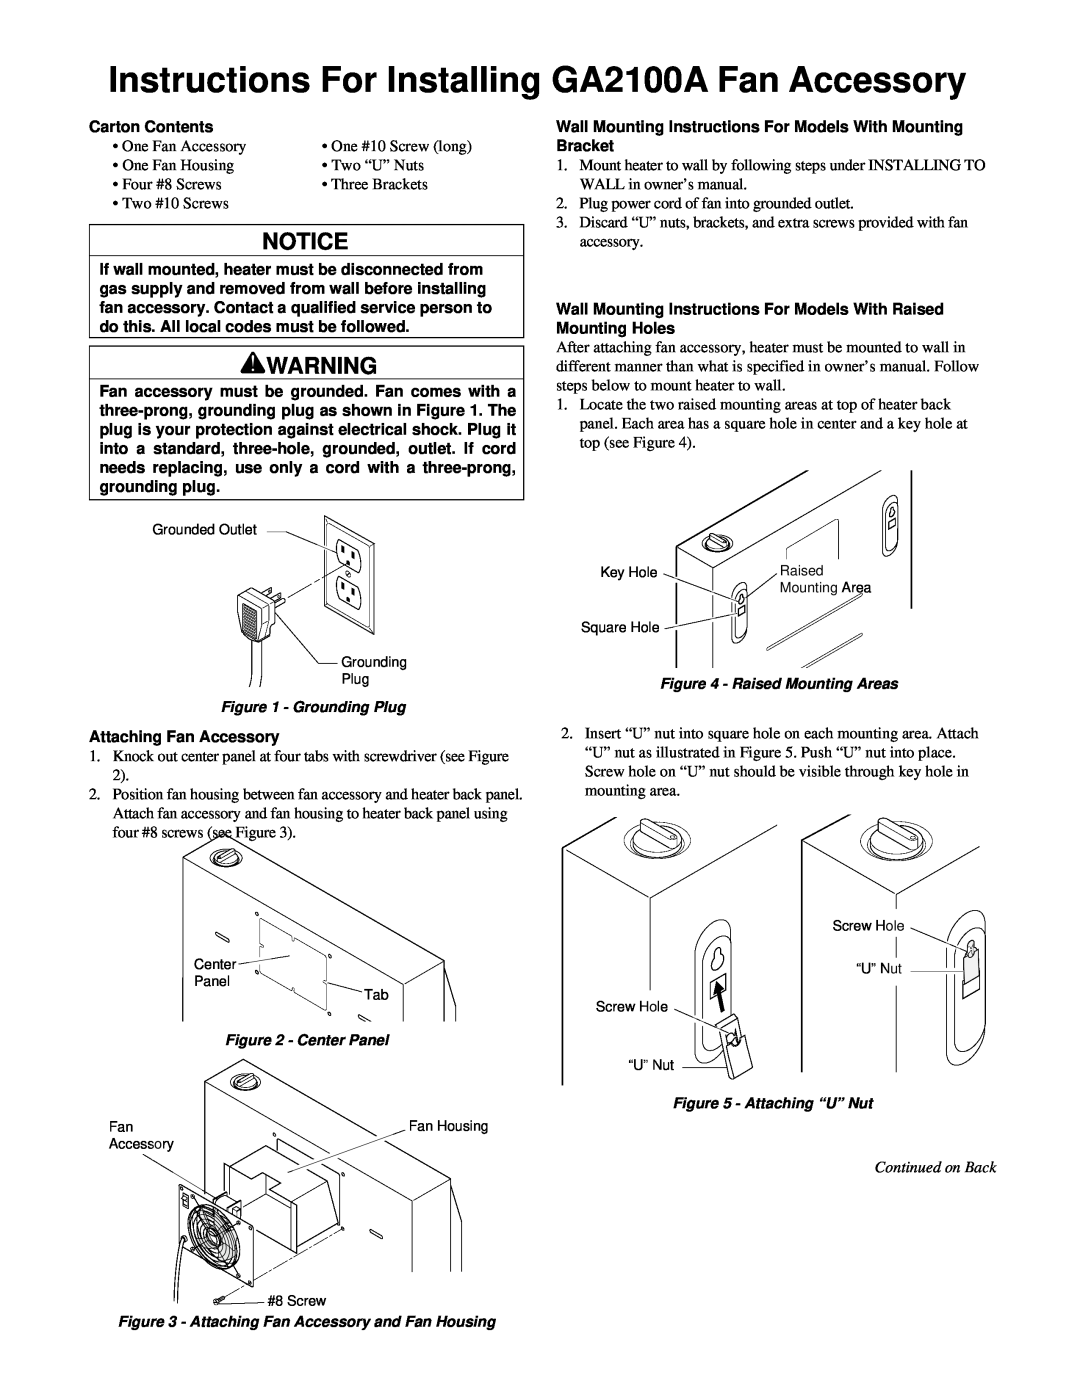 Desa owner manual Instructions For Installing GA2100A Fan Accessory, Continued on Back 